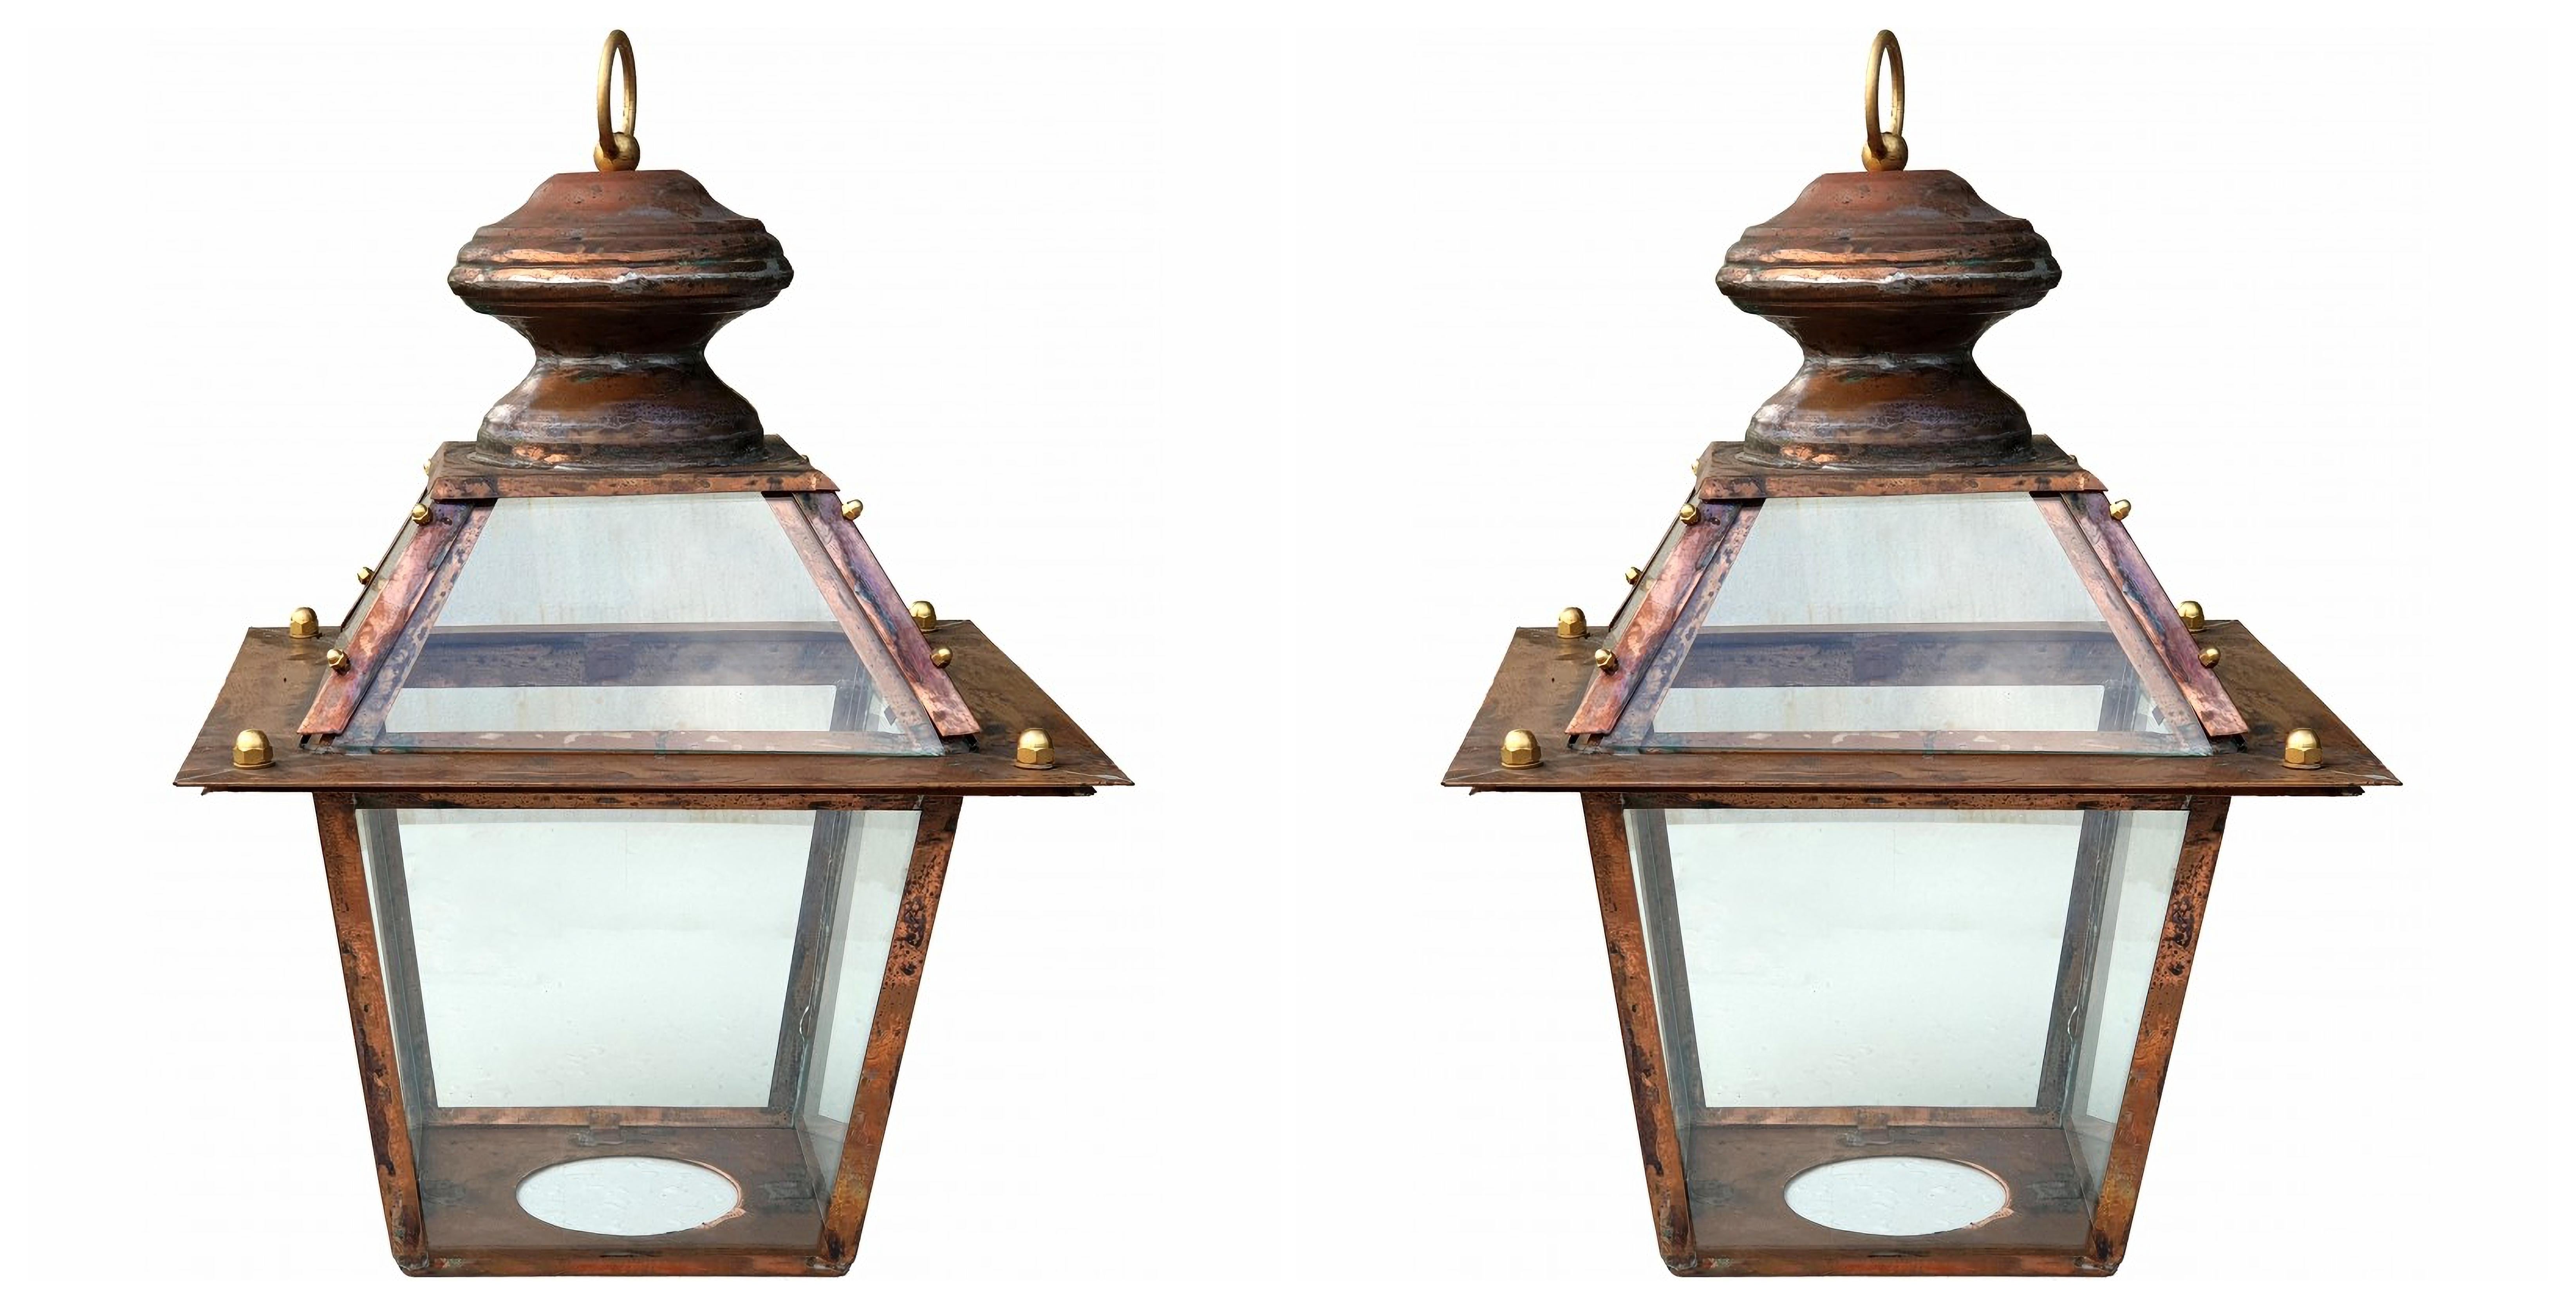 Baroque Pair of Italian Lanterns in Tuscan Copper with Ring Early 20th Century For Sale